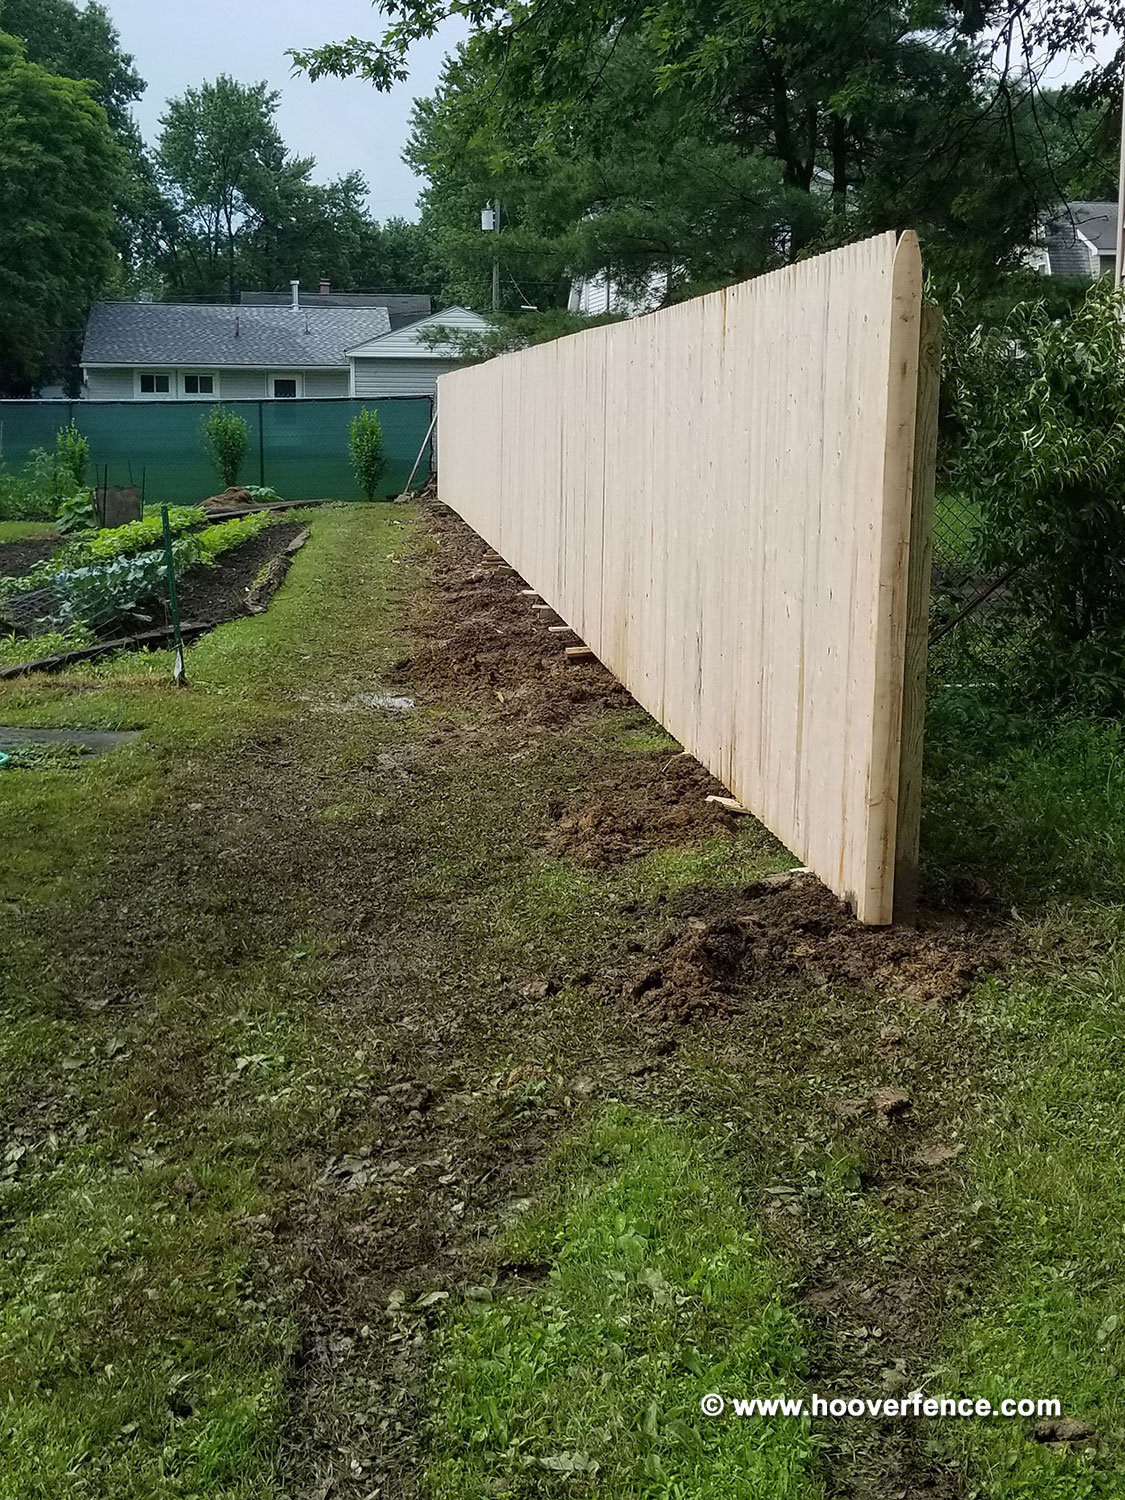 Hoover Fence Co Install - 6' High Spruce Stockade Privacy Fence Panels - Warren, Ohio - 2018